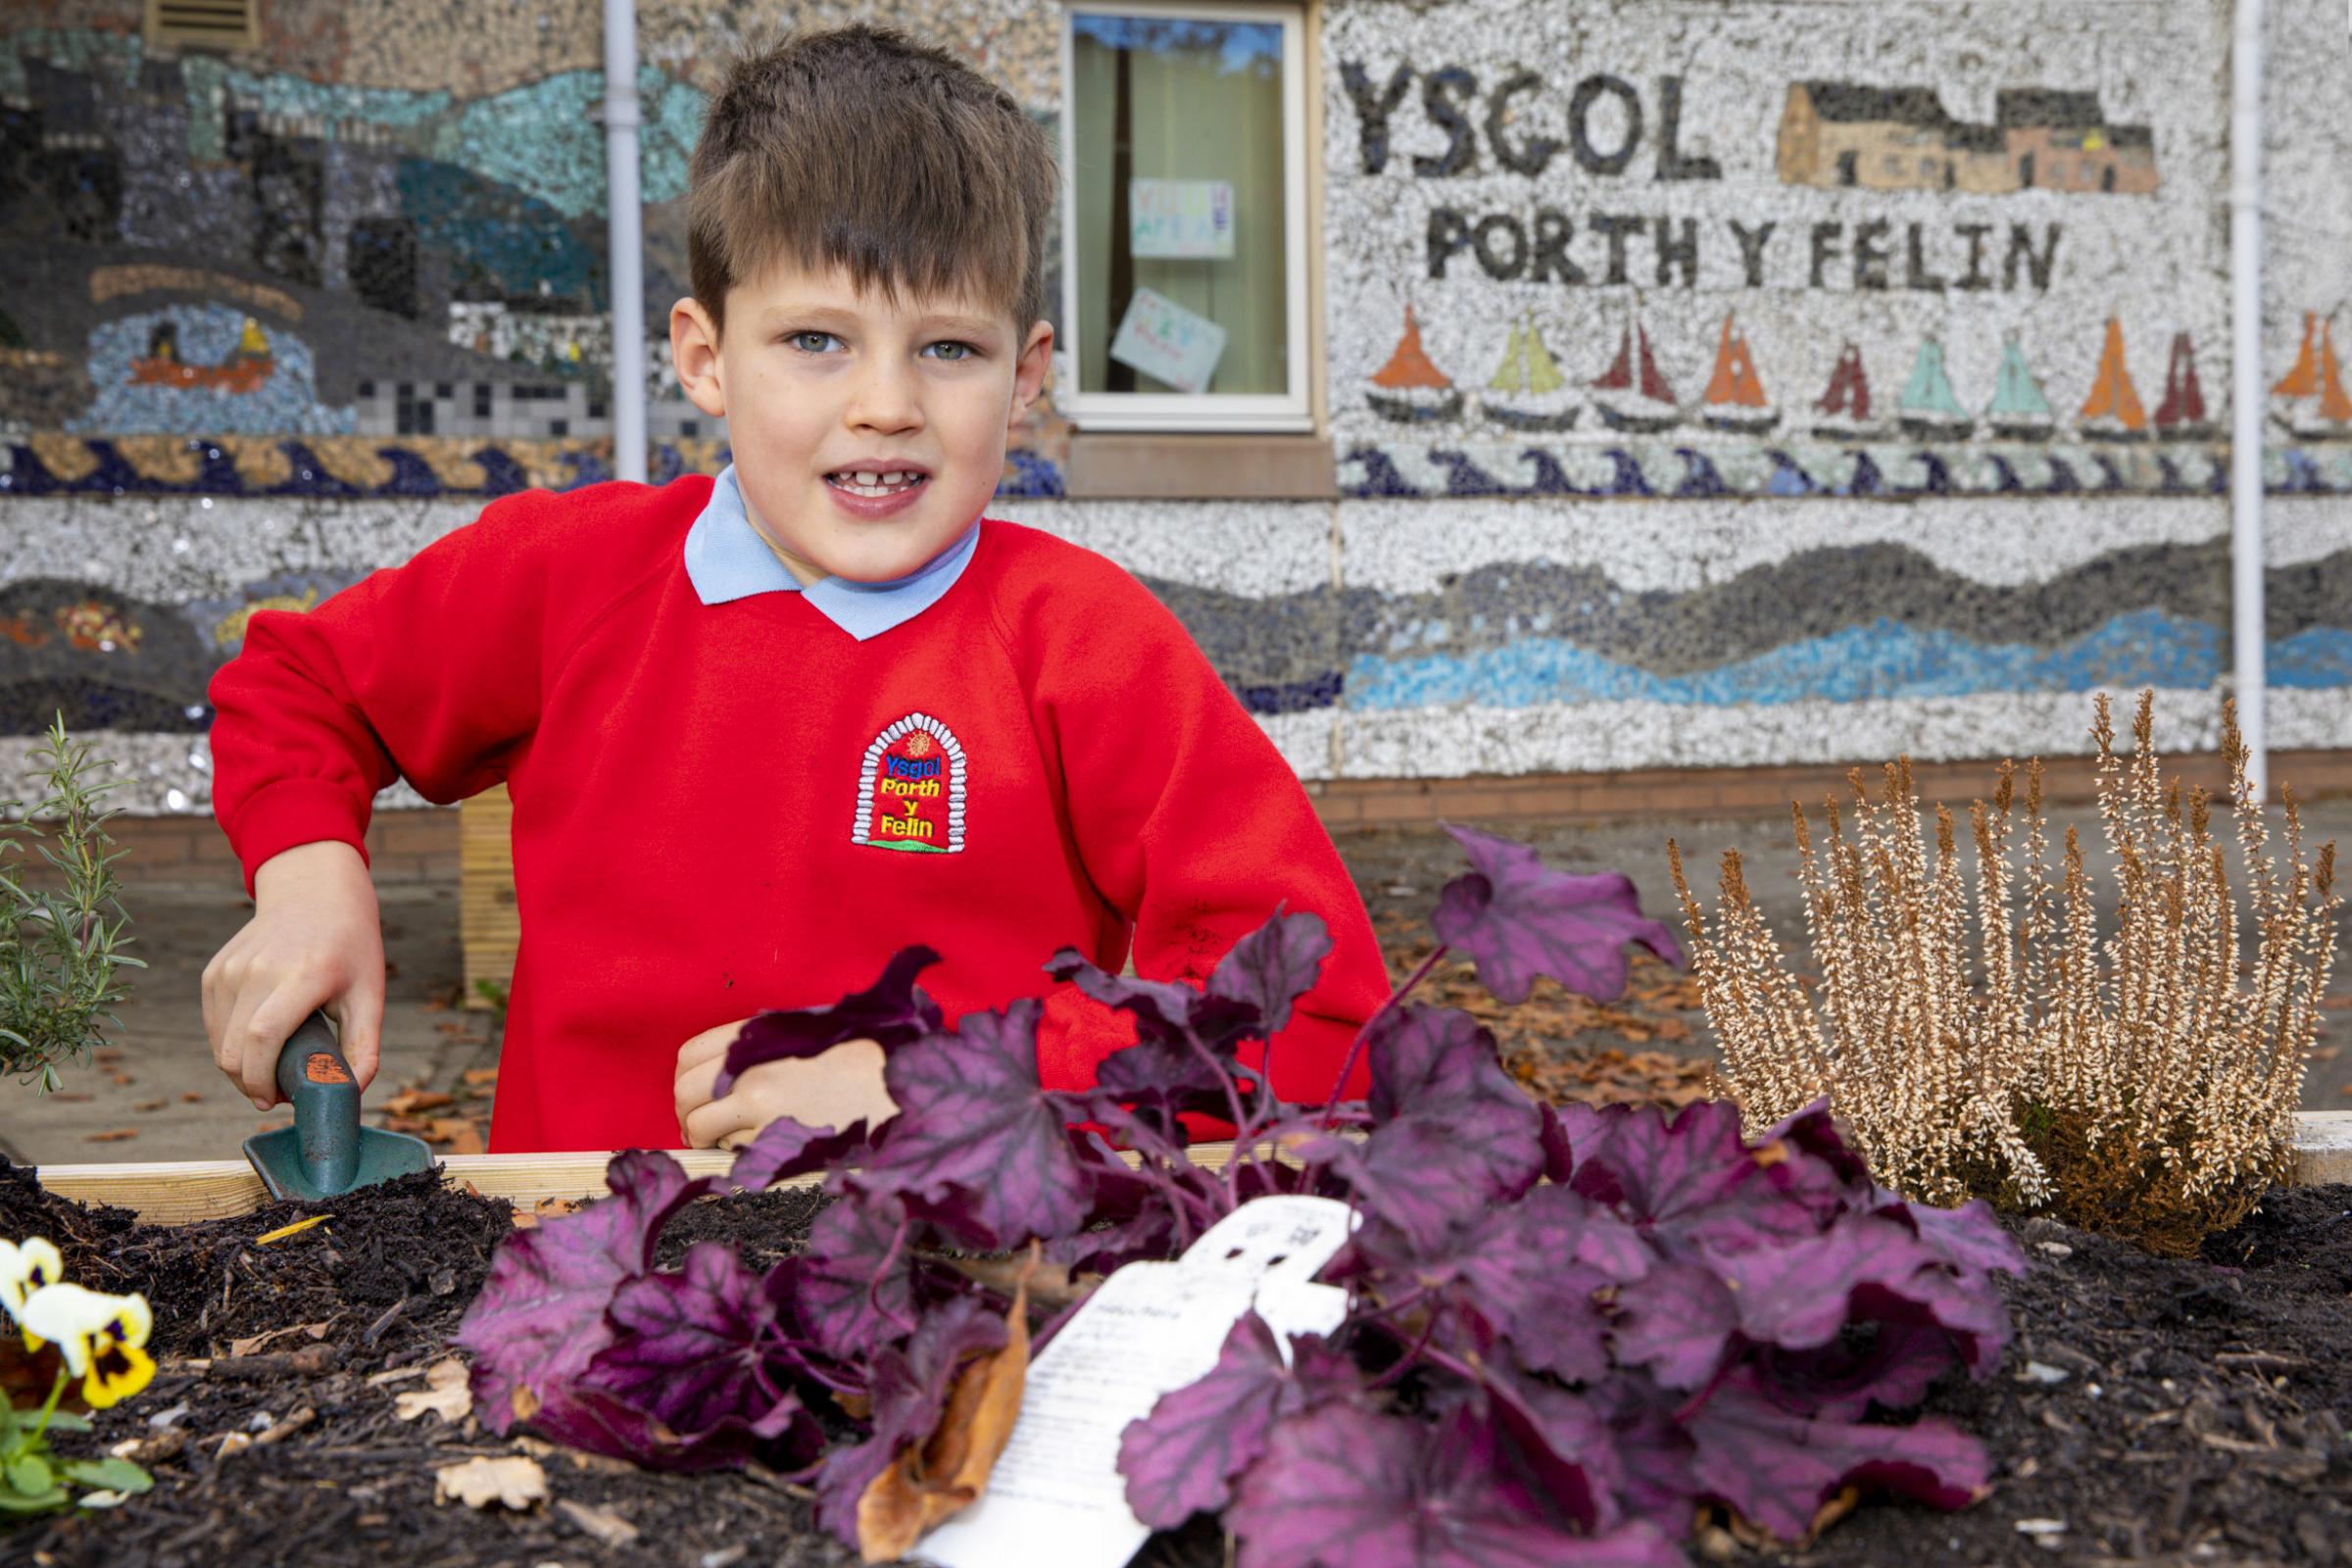 An Ysgol Porth y Felin and school council member tops up a planter with water. Picture Mandy Jones